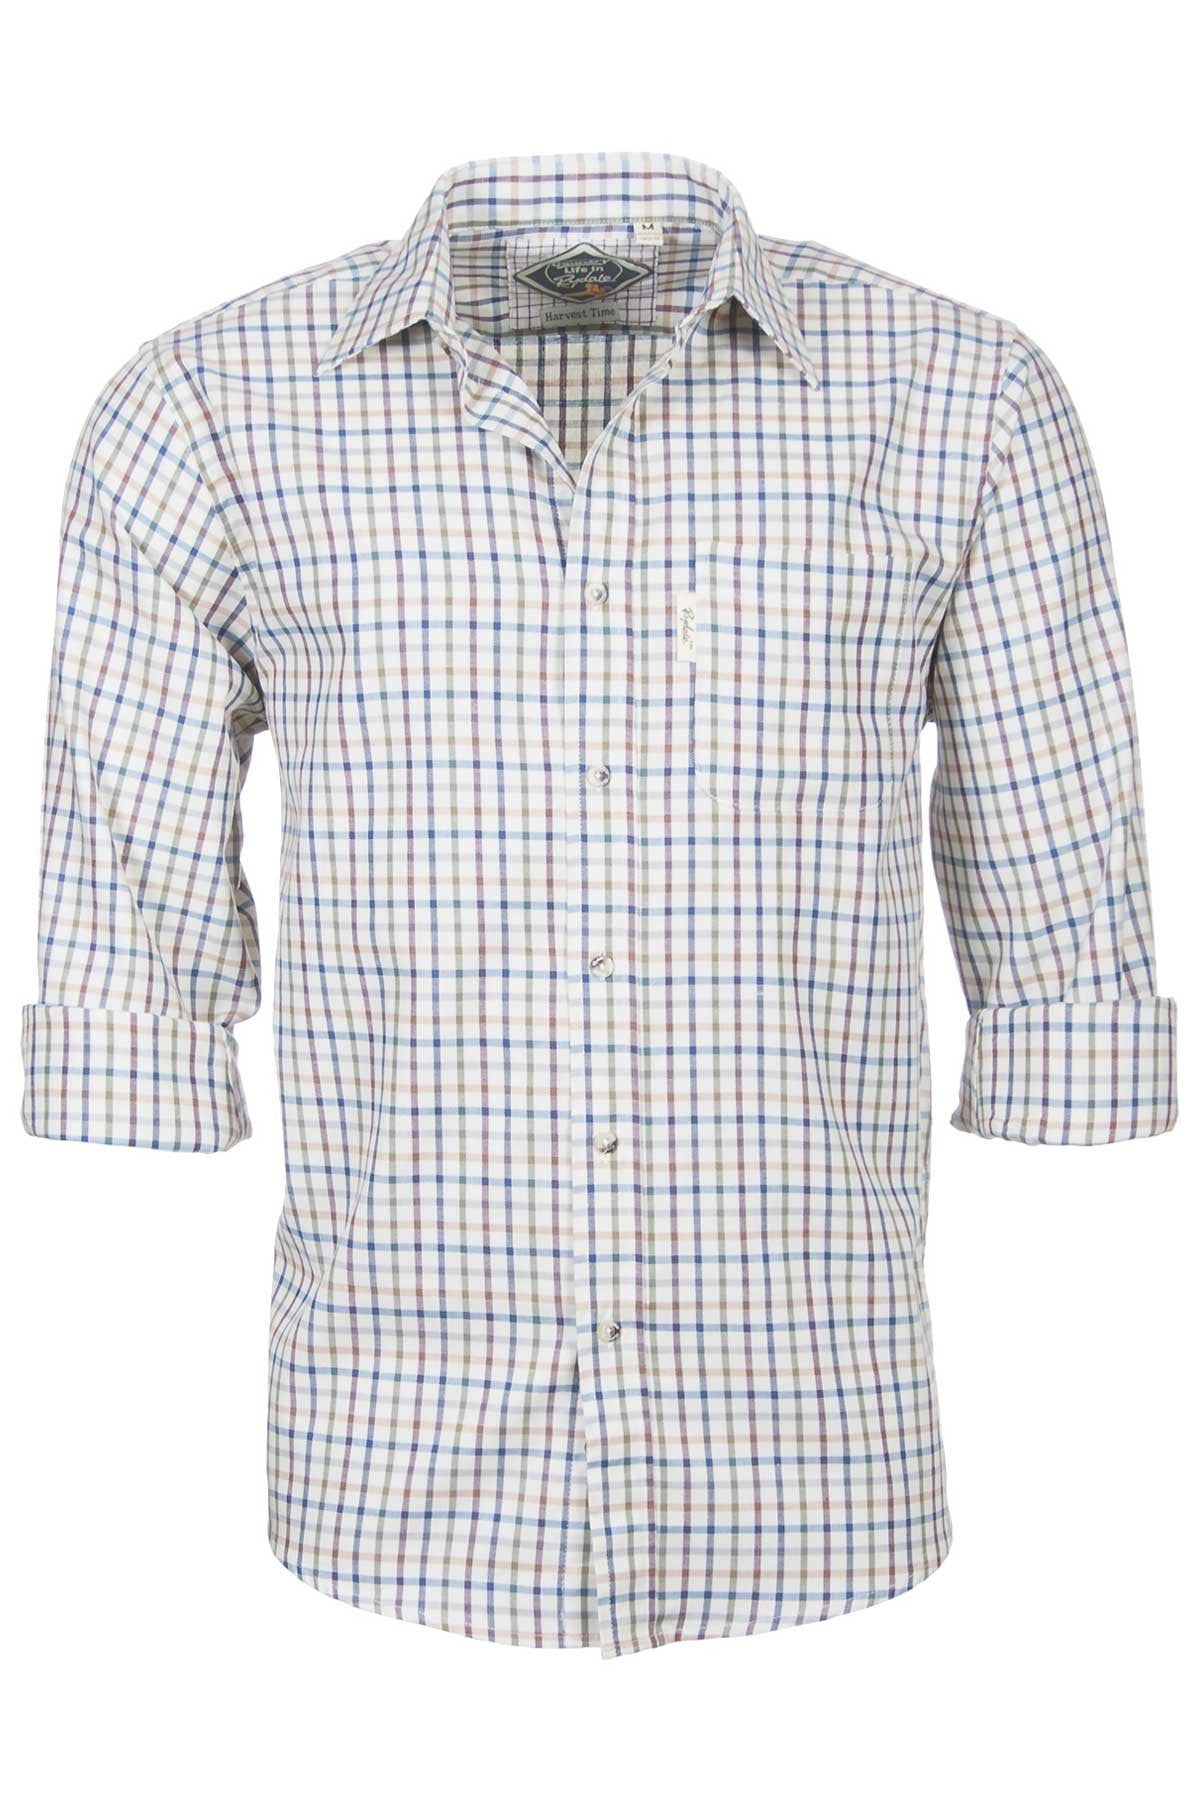 Mens Harvest Time Cotton Country Check Shirts UK | Rydale